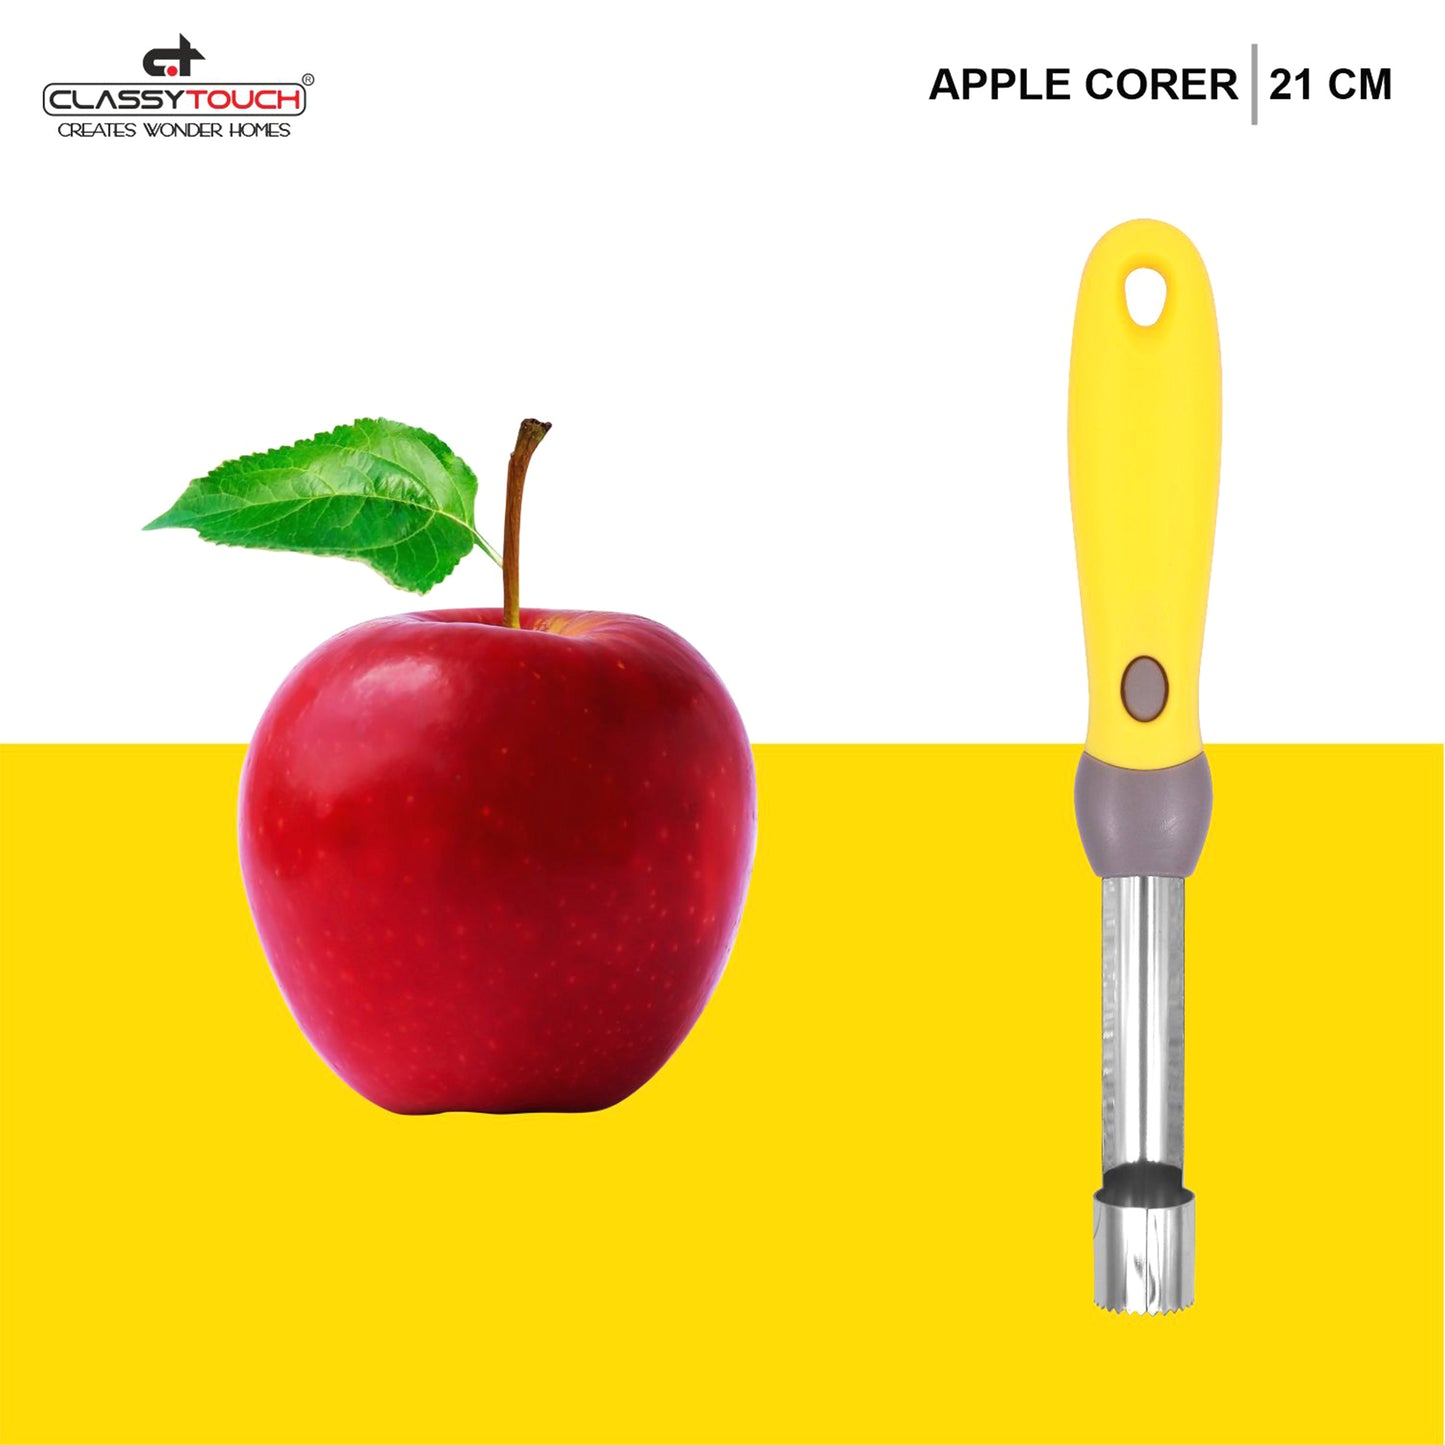 Classy Touch - Apple Corer Stainless Steel Apple Corer Remover with Soft Rubber Handle Yellow - Ghar Sajawat